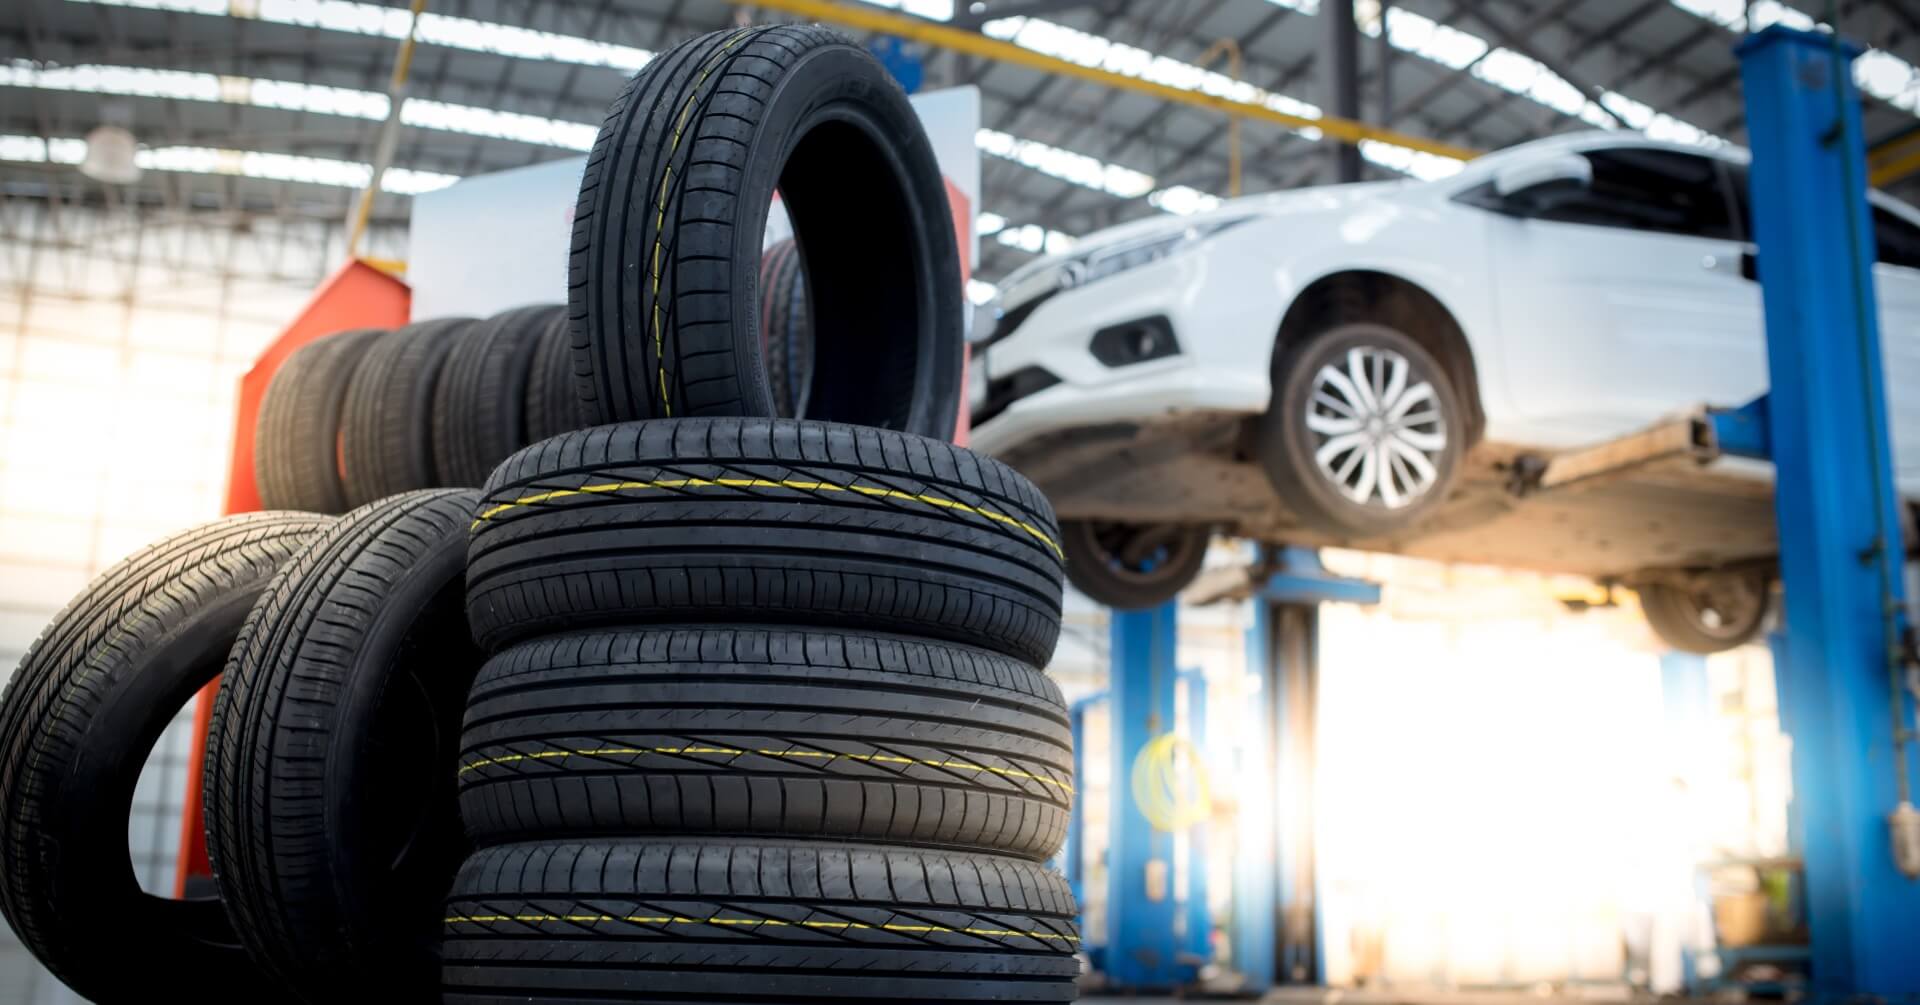 We offer plenty of tires to suit your needs